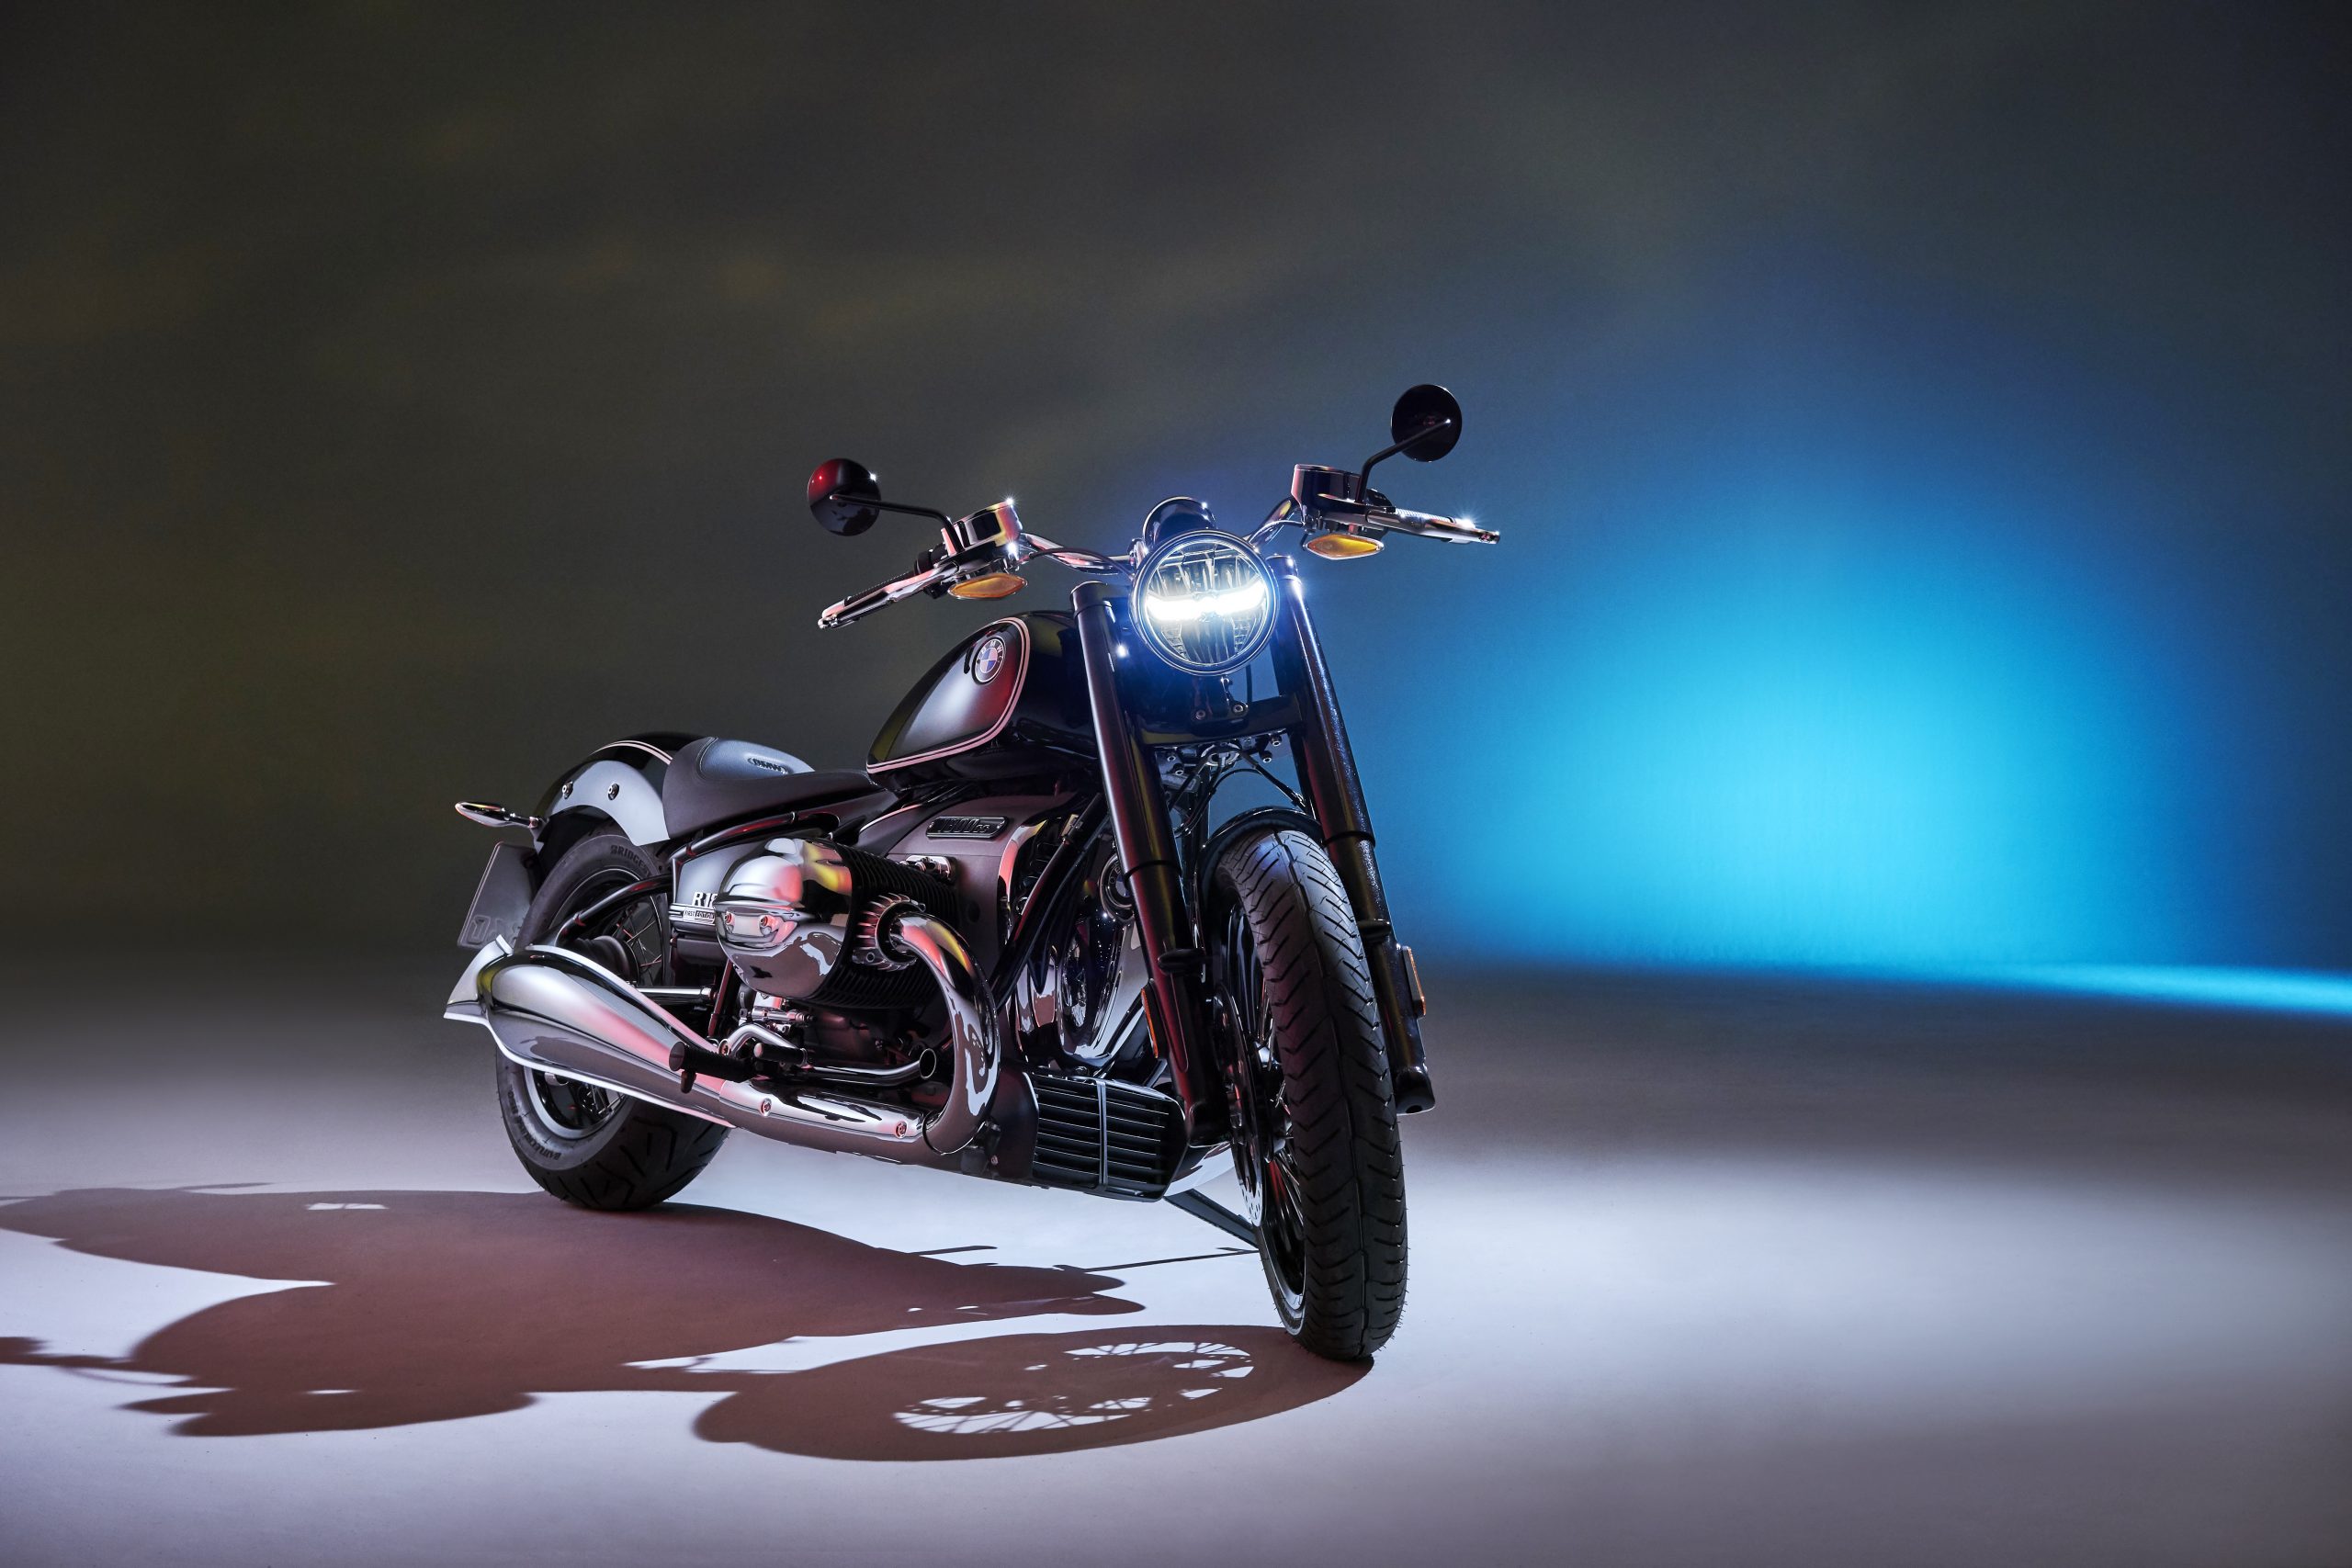 Bmw R18 Cruiser Bike Launched In India Priced At Inr 18 90 Lakh The Indian Wire